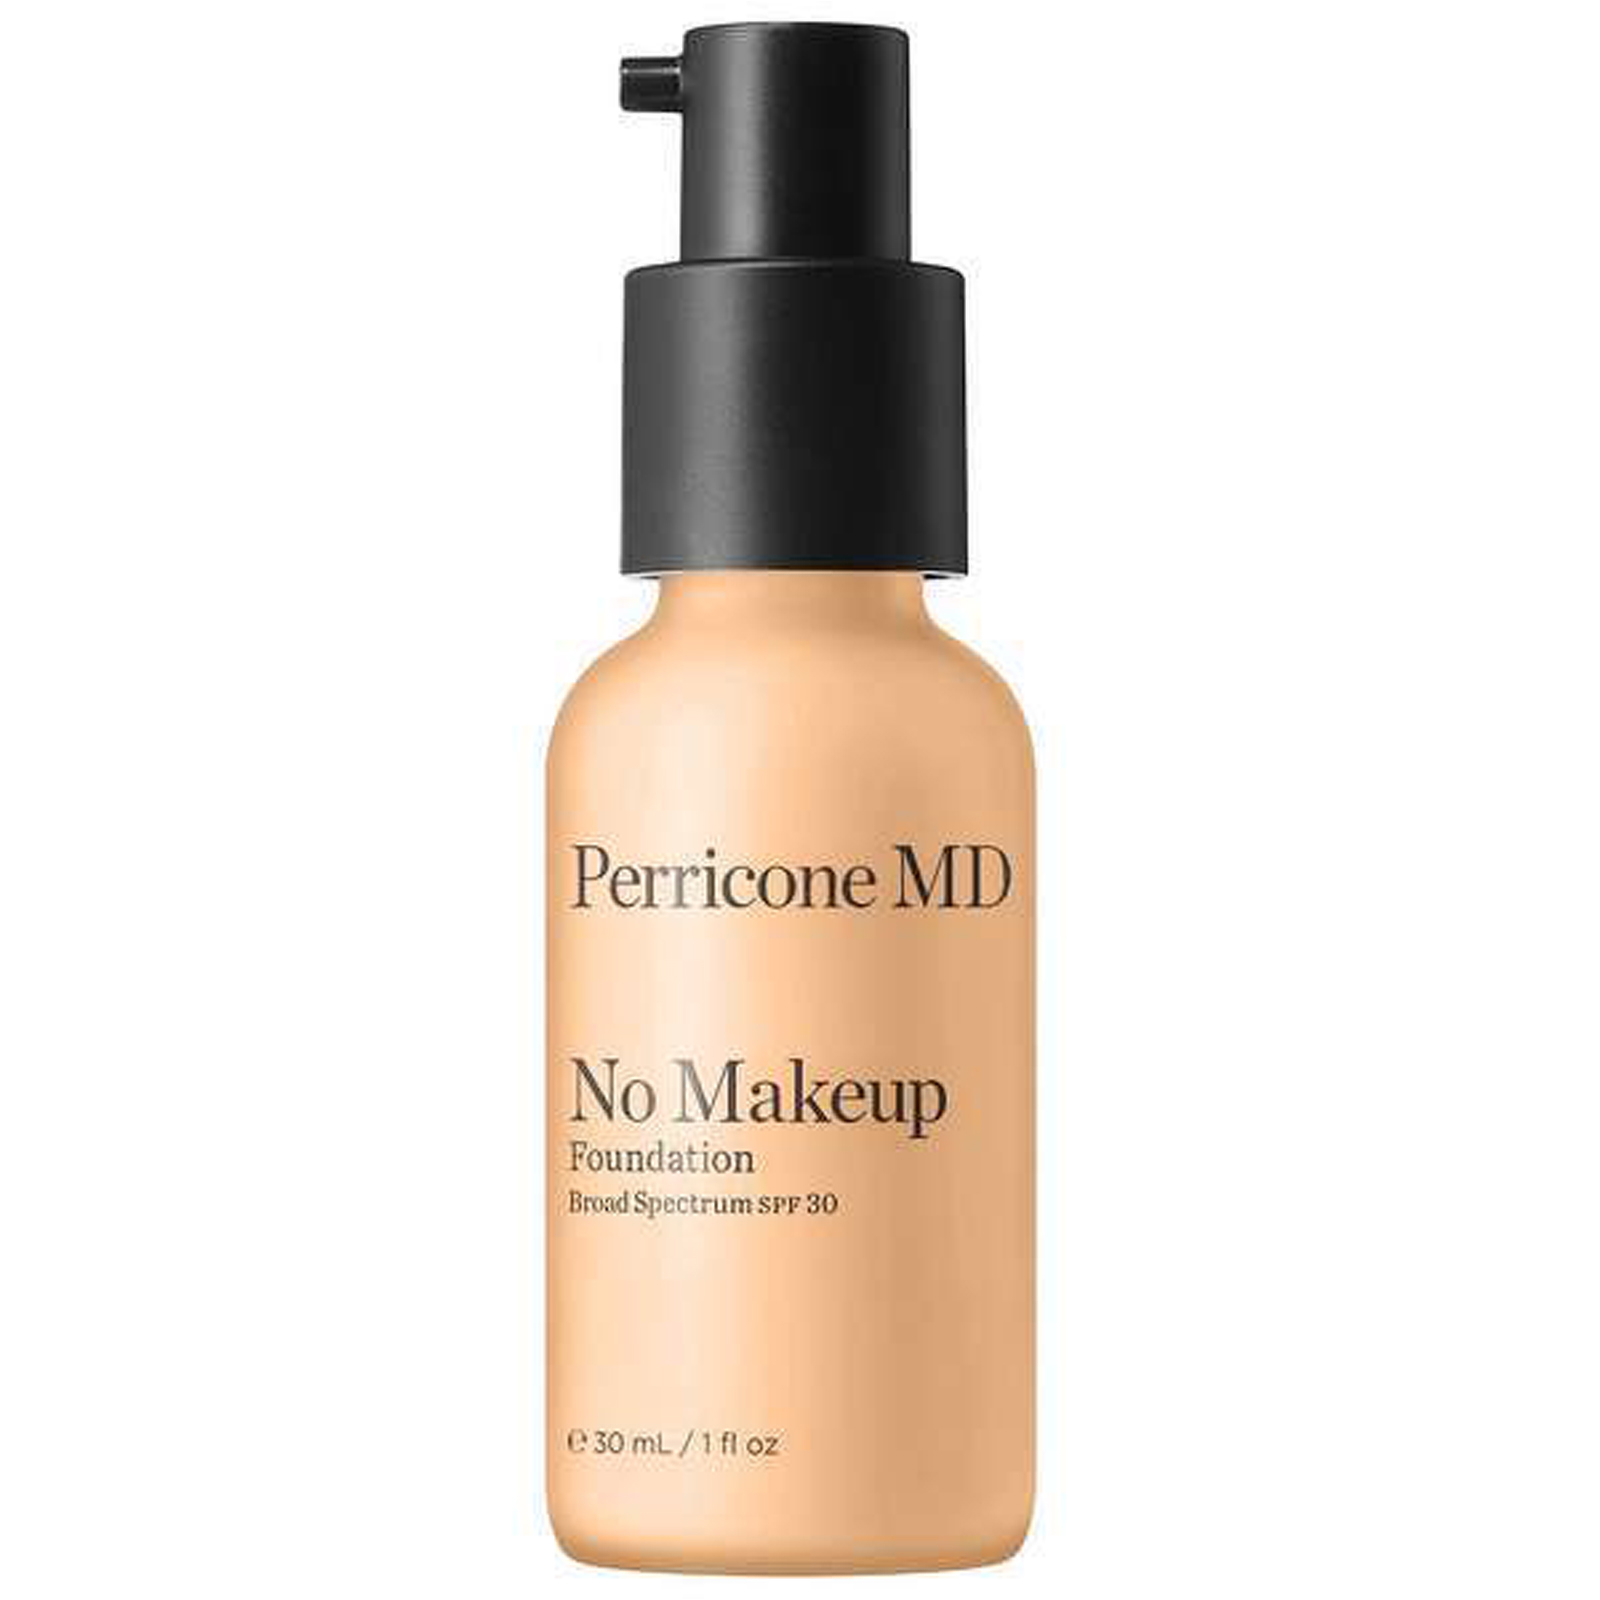 Perricone MD - Perricone MD Skin Care No Makeup Foundation 